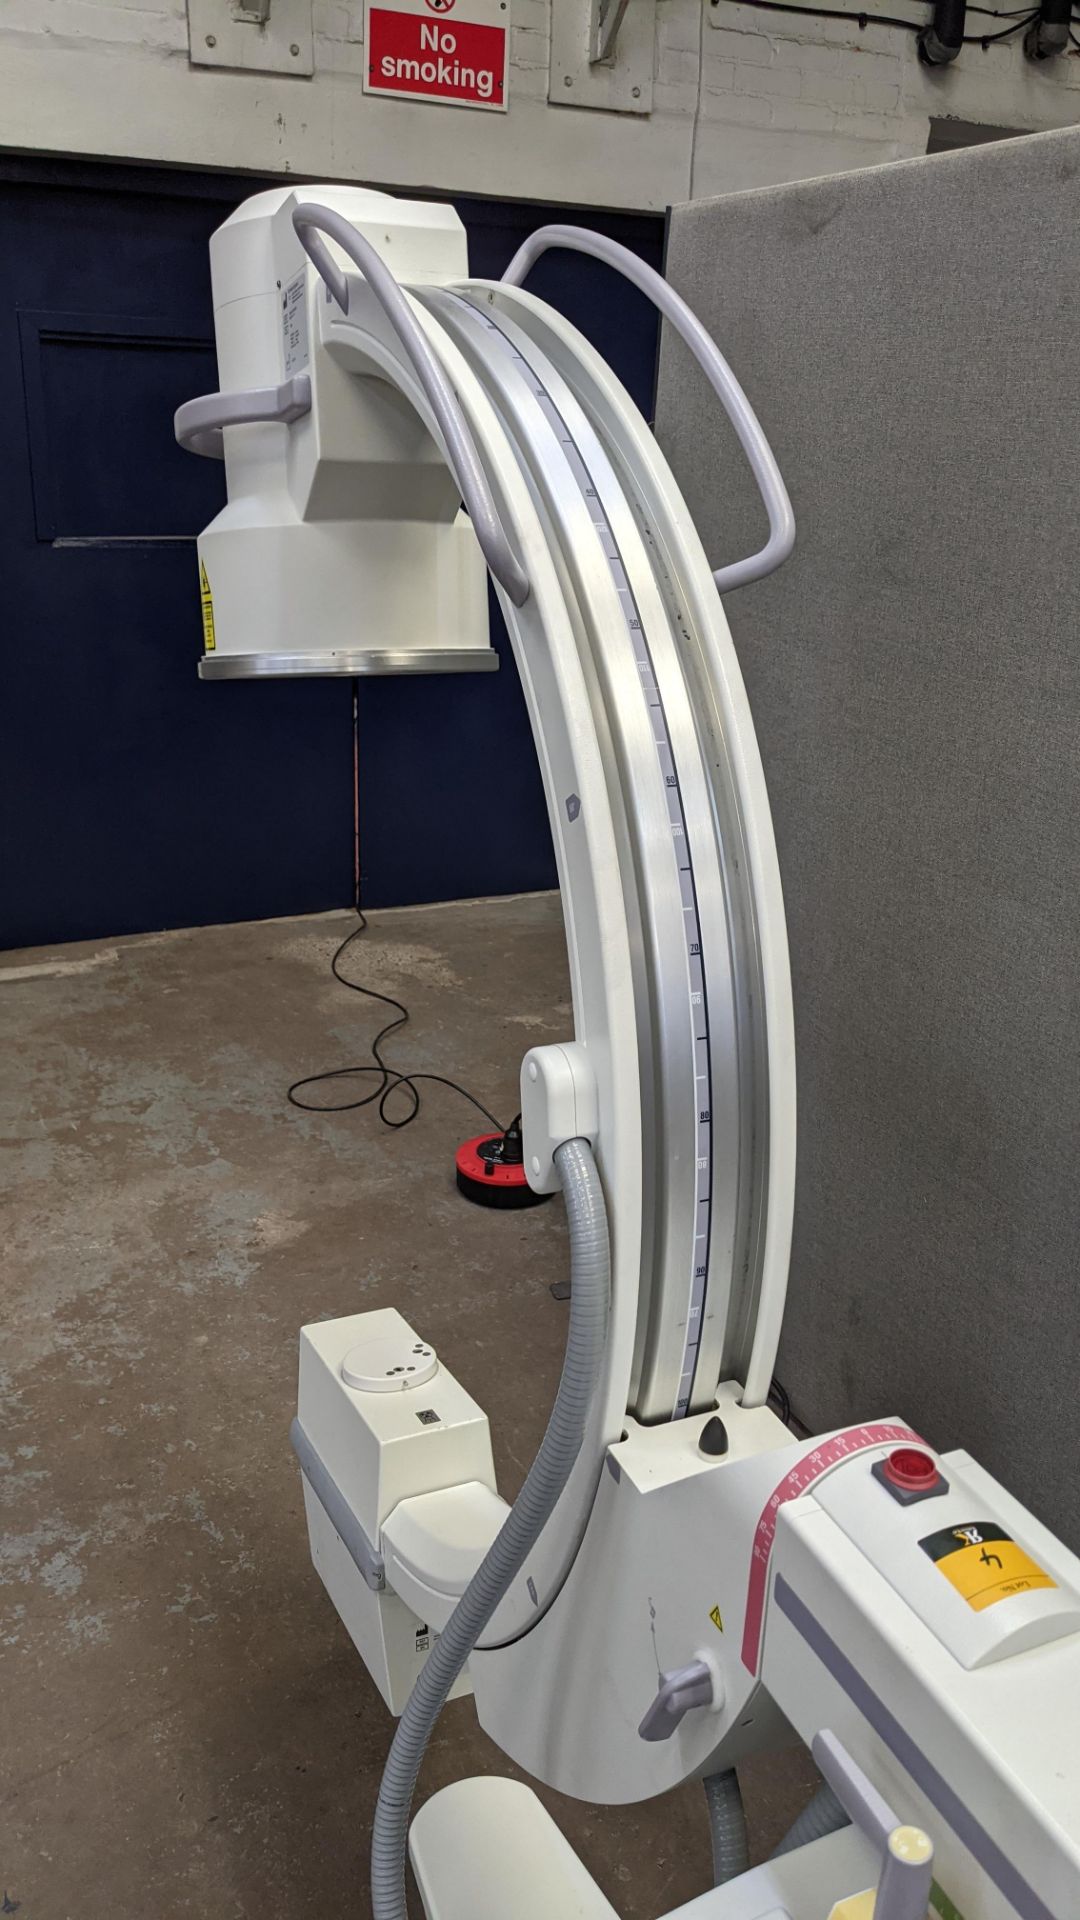 GE-OEC Fluorostar imaging system, purchased new in August 2017. EO4 Series. - Image 47 of 68